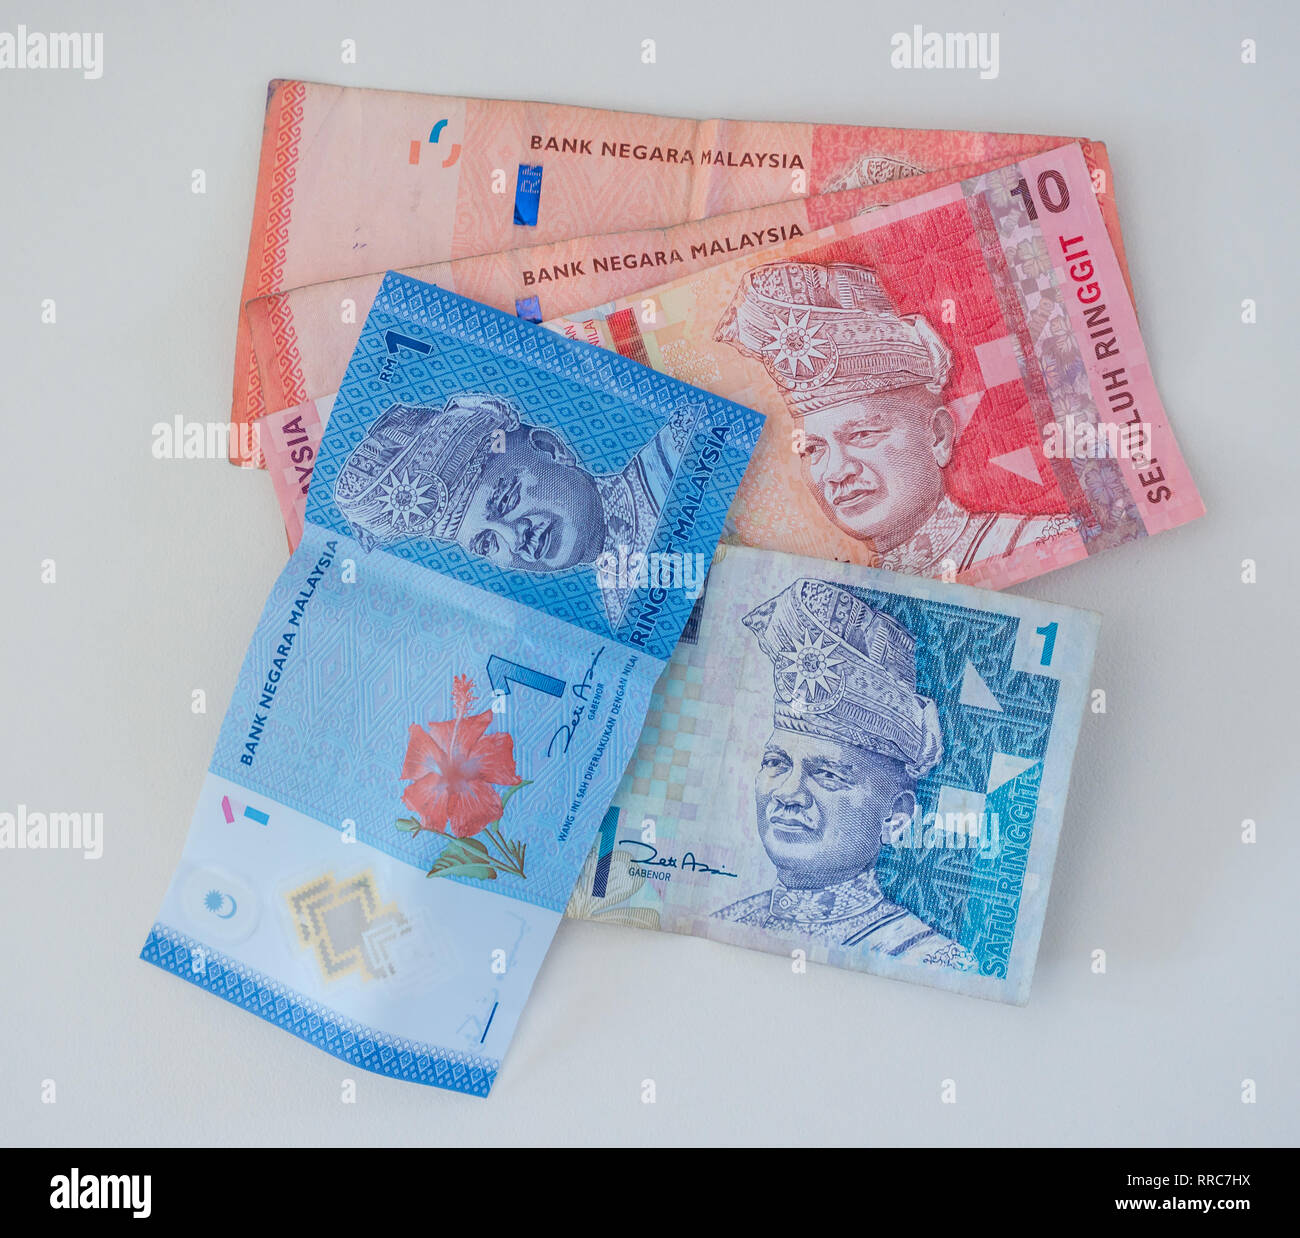 Foreign money banknotes; Malaysian Ringgit, 10 Ringgit and 1 Ringgit notes Bank Negara Malaysia Stock Photo